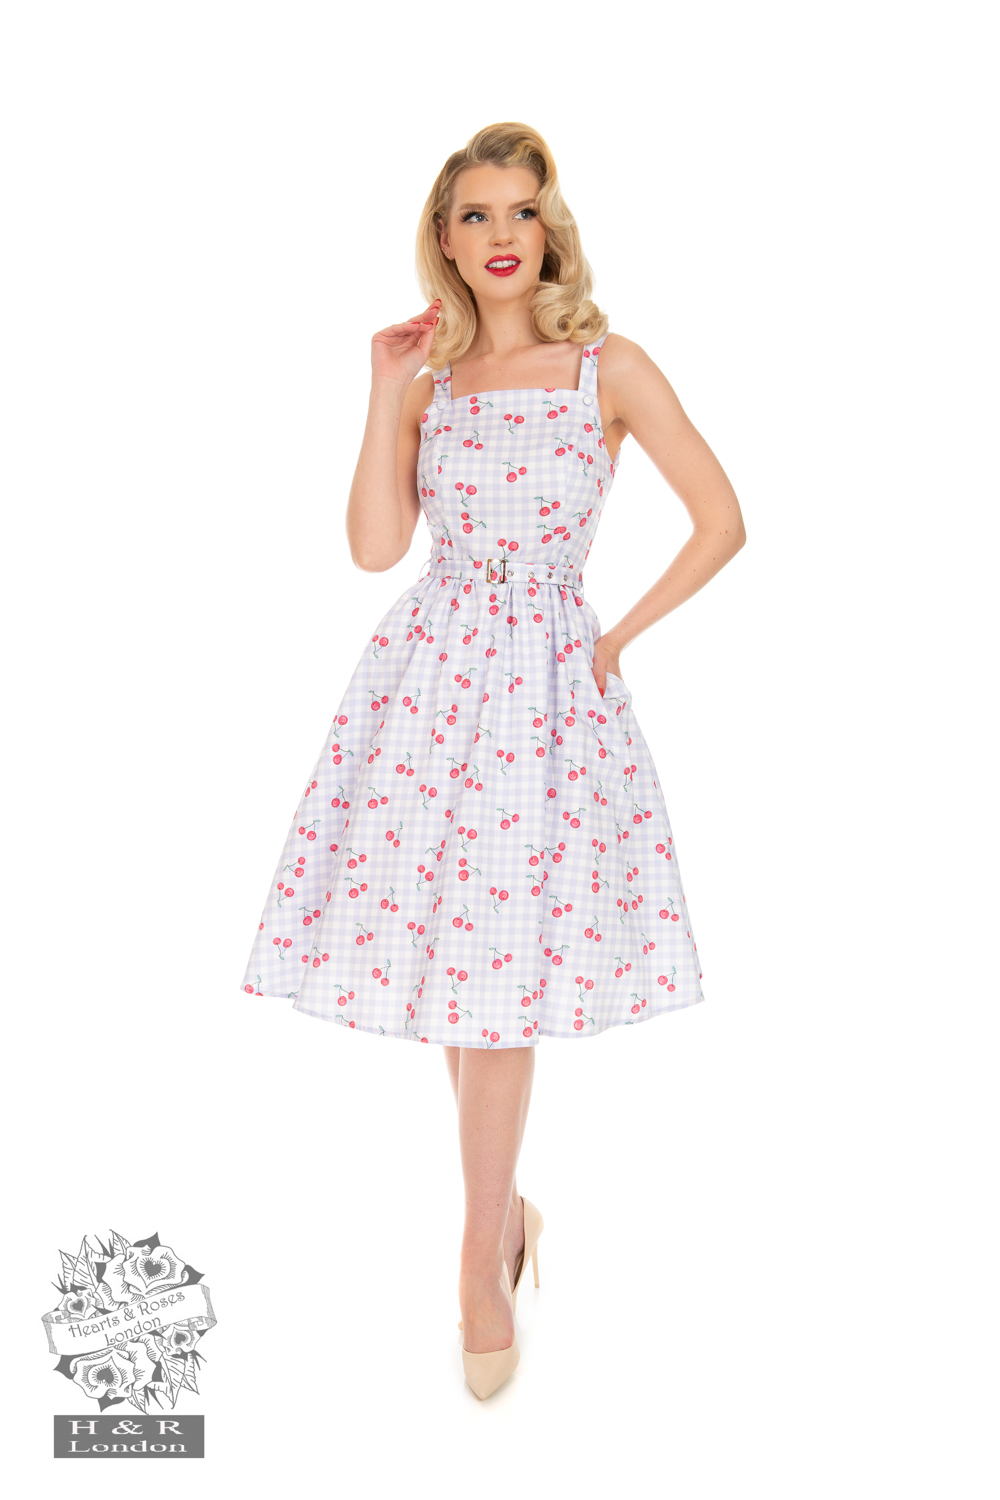 Matilda Cherry Swing Dress In Bluewhite Hearts And Roses London